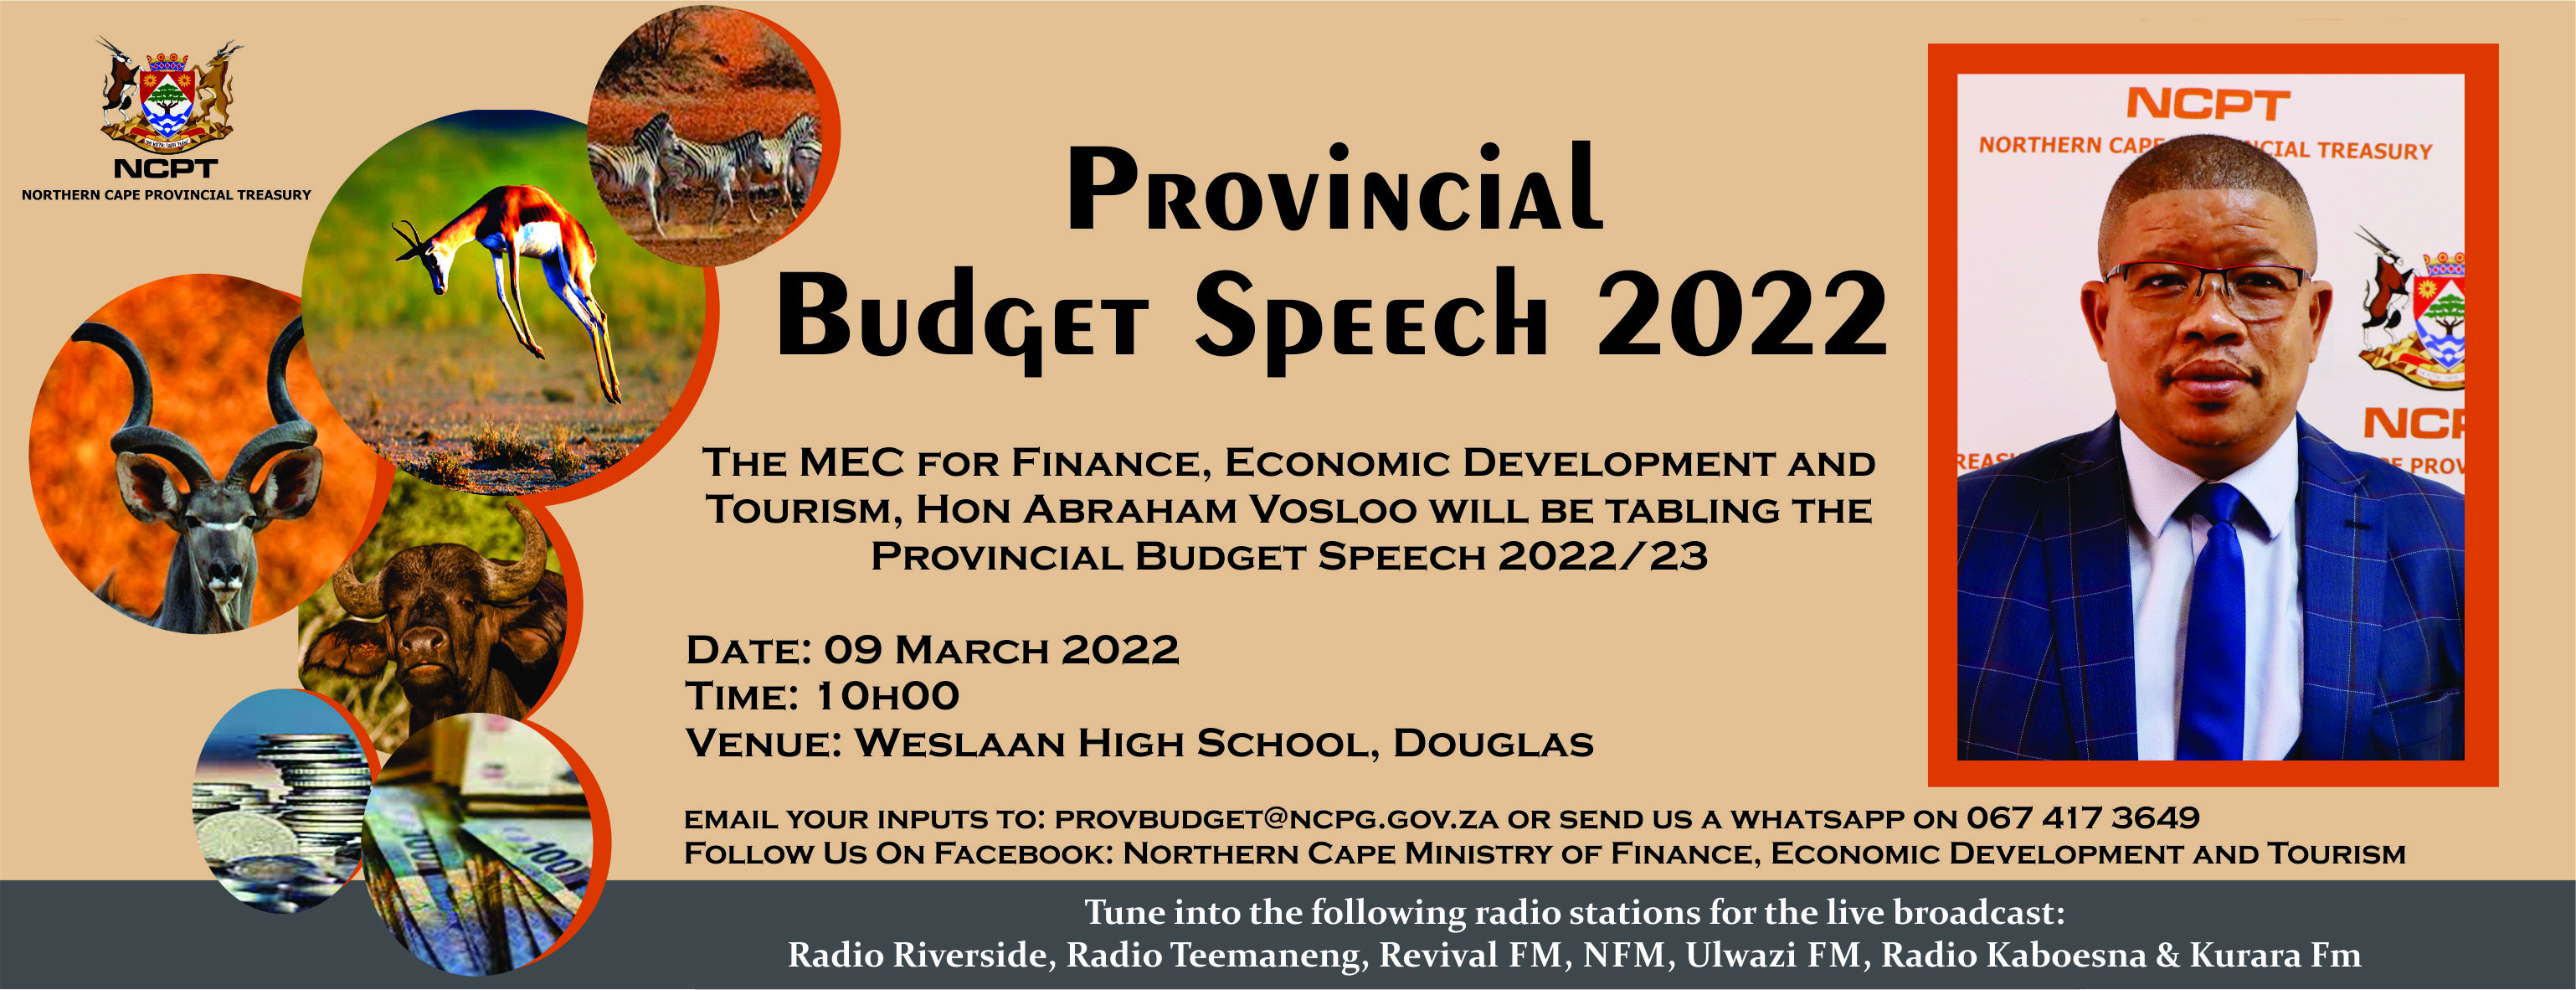 The MEC for Finance, Economic Development and Tourism will be tabling the Provincial Budget Speech 2022/23 on the 9th of March 